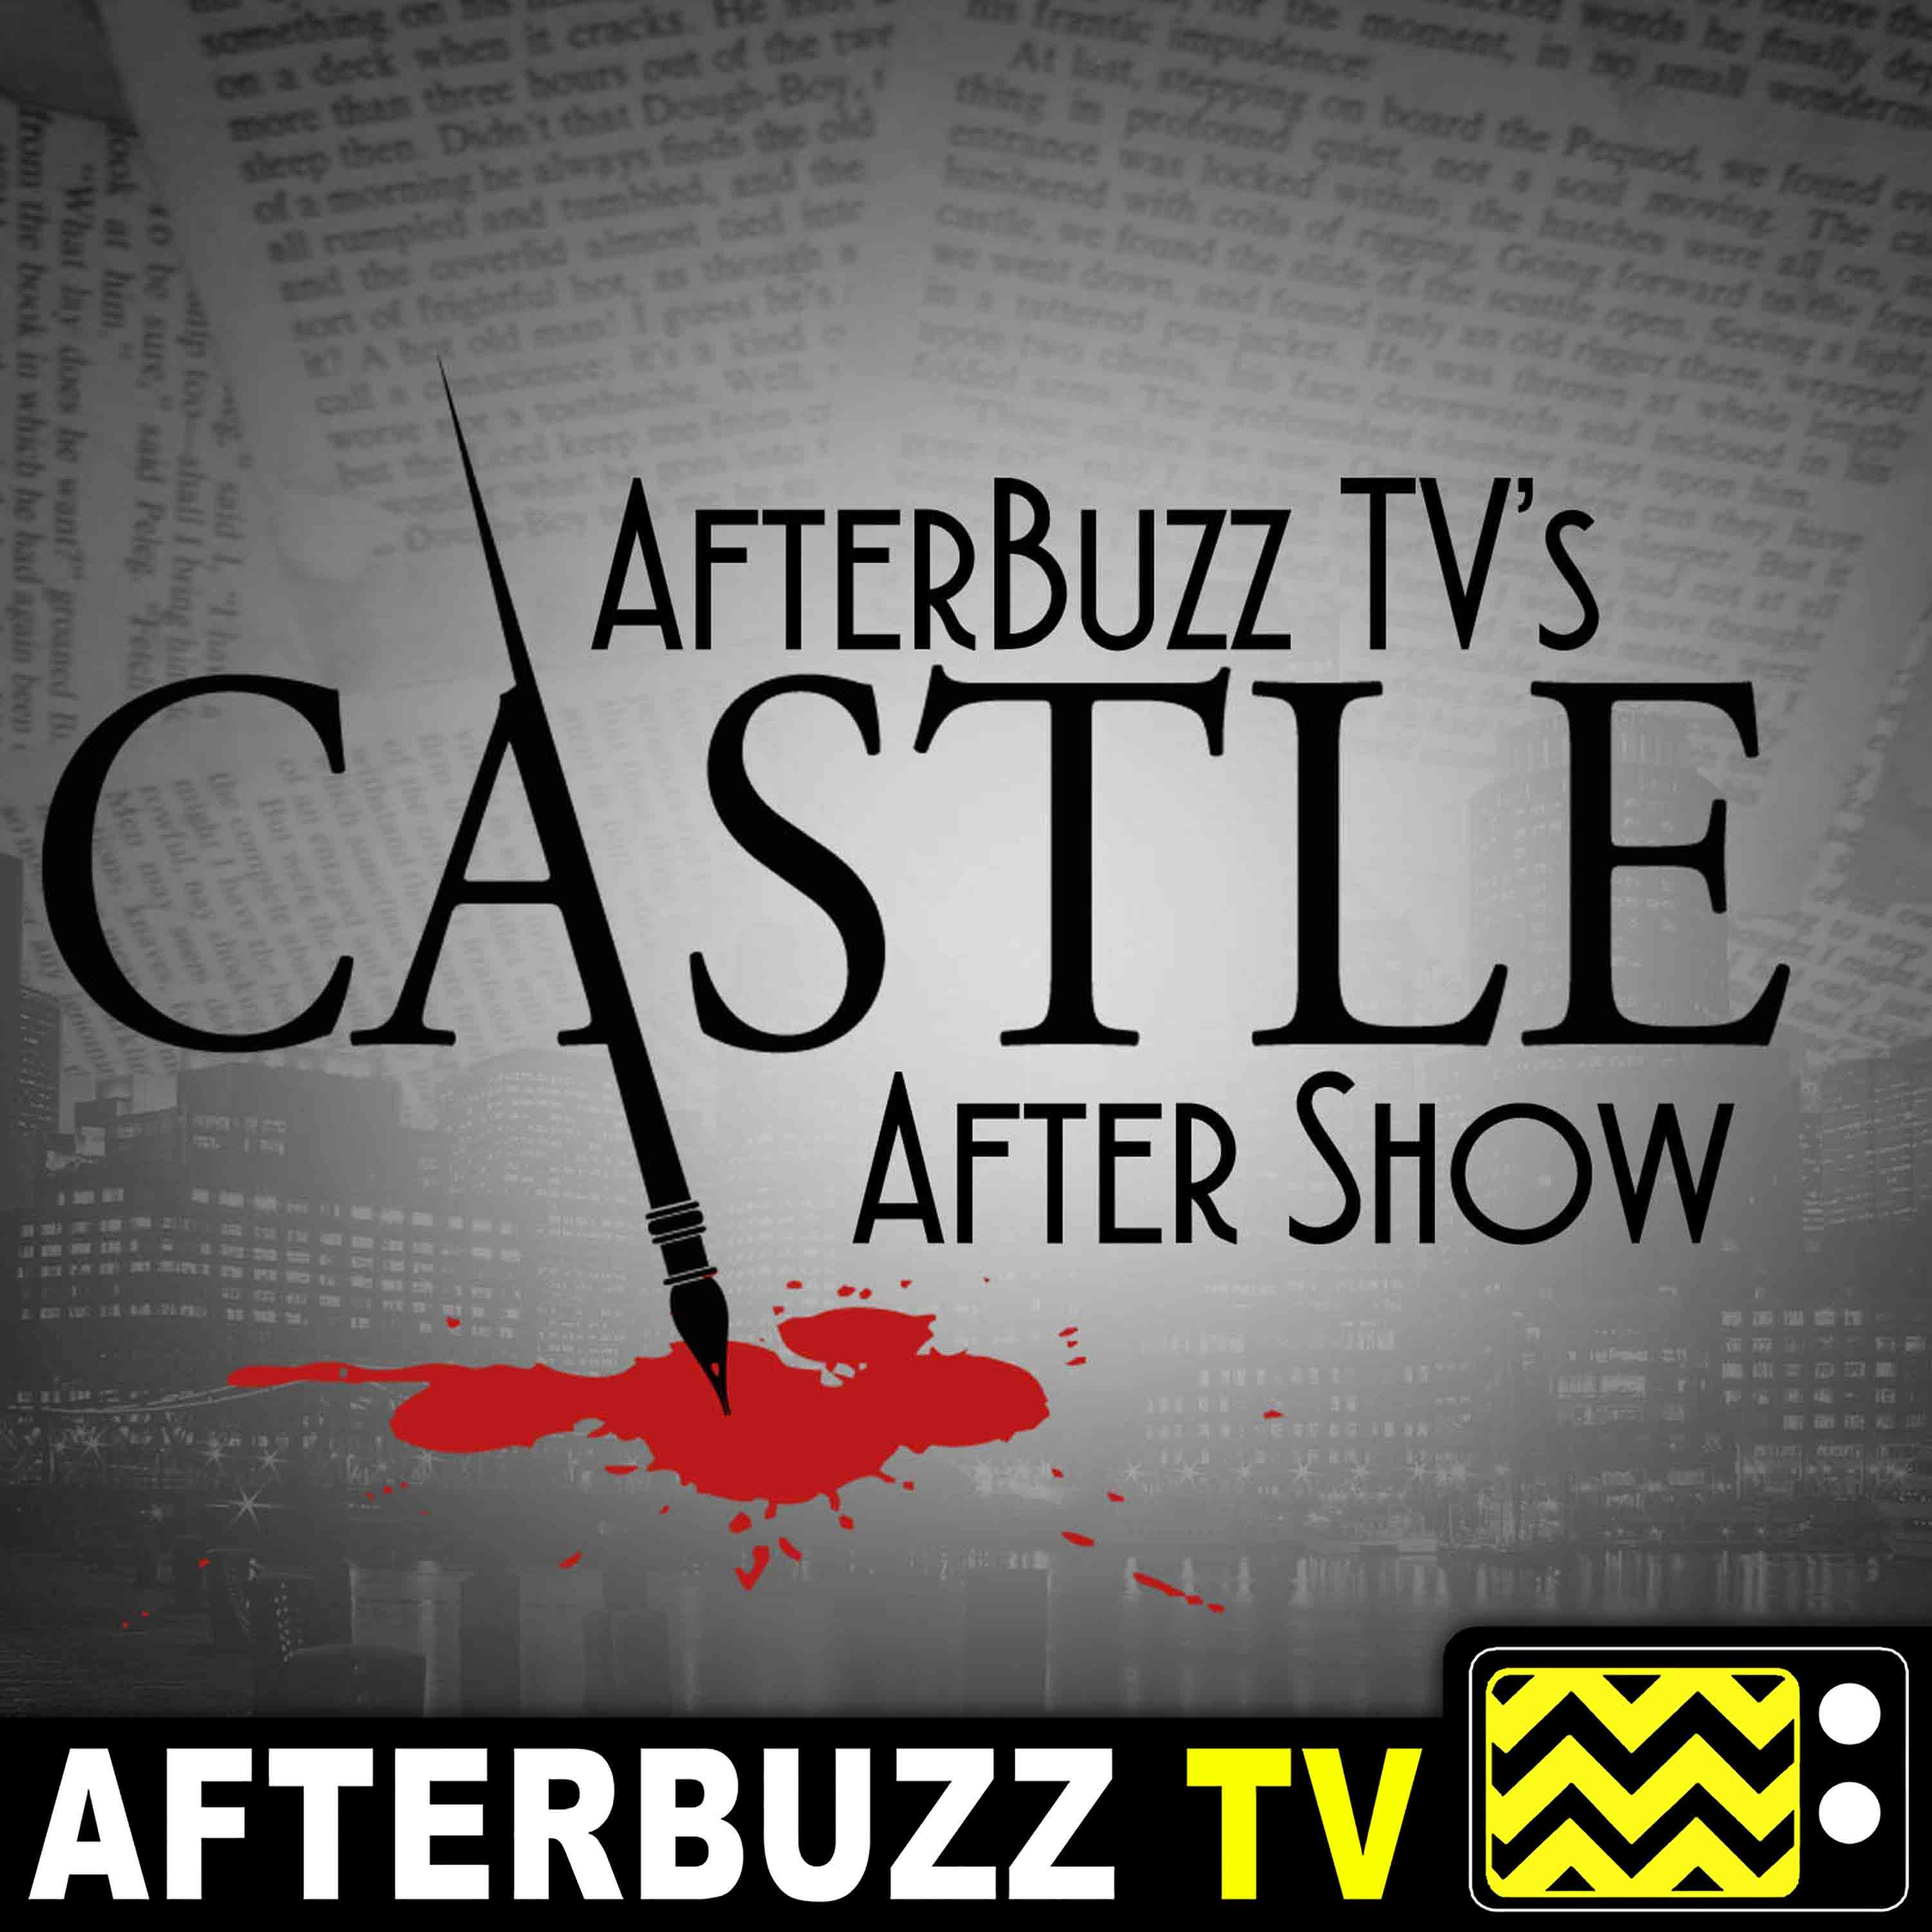 Castle S:8 | Toks Olagundoye Guests on The G.D.S. E:14 | AfterBuzz TV AfterShow